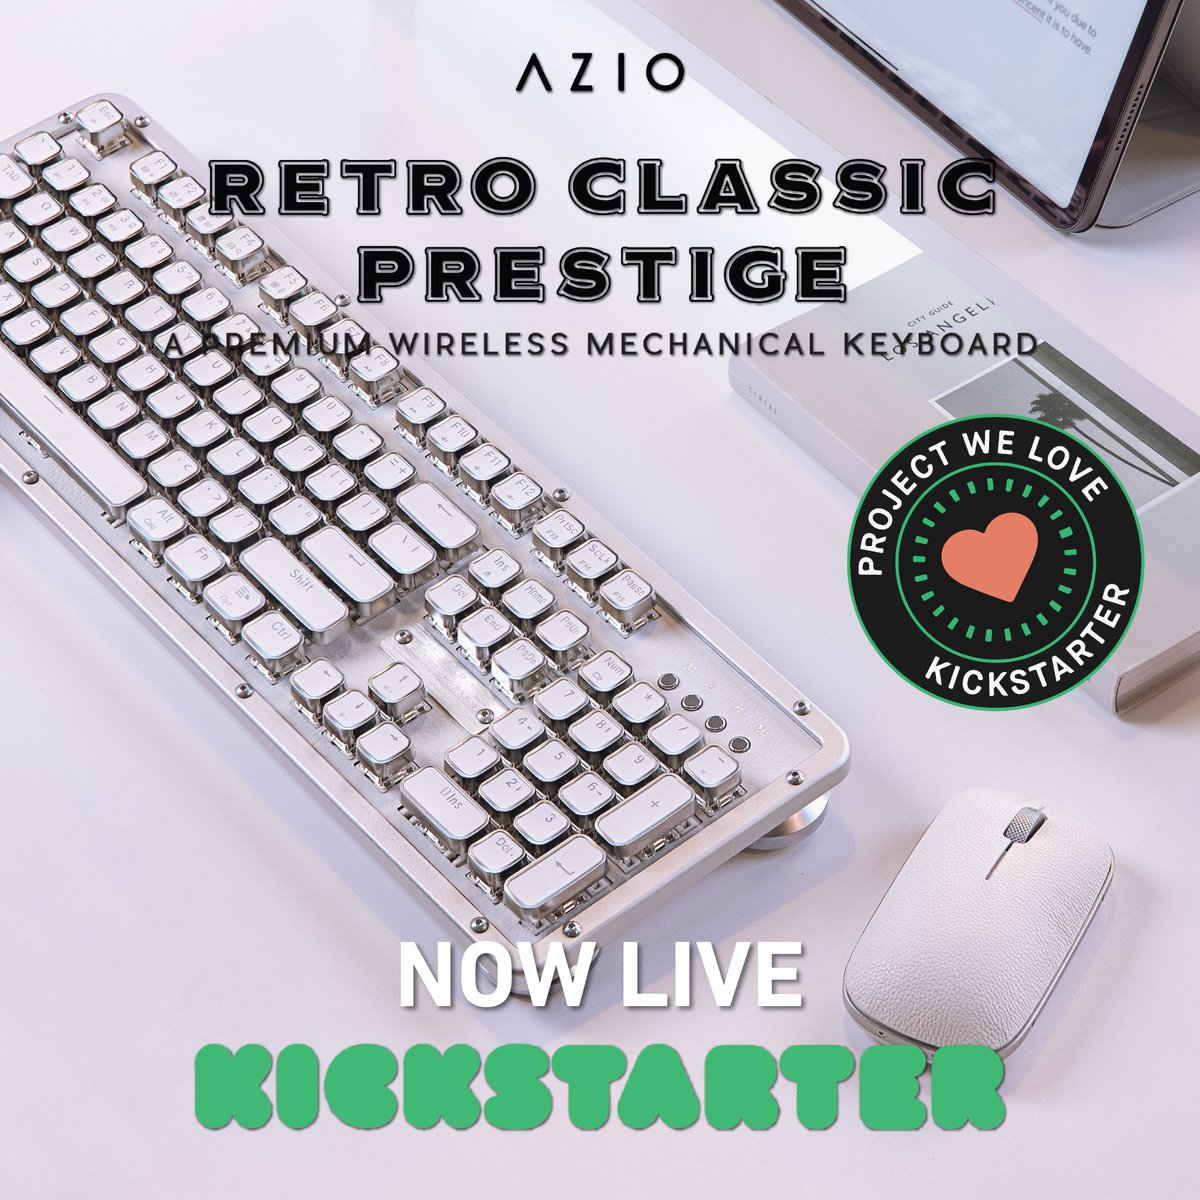 Our RC Prestige #Kickstarter campaign is still live and running! Check us out at the link in bio to view our campaign and snag our Early Bird discount! #azio #keyboard #retro #classic #vintage #campaign #LiveNow #crowdfunding #lifestyle #premium #design #tech #projectwelove